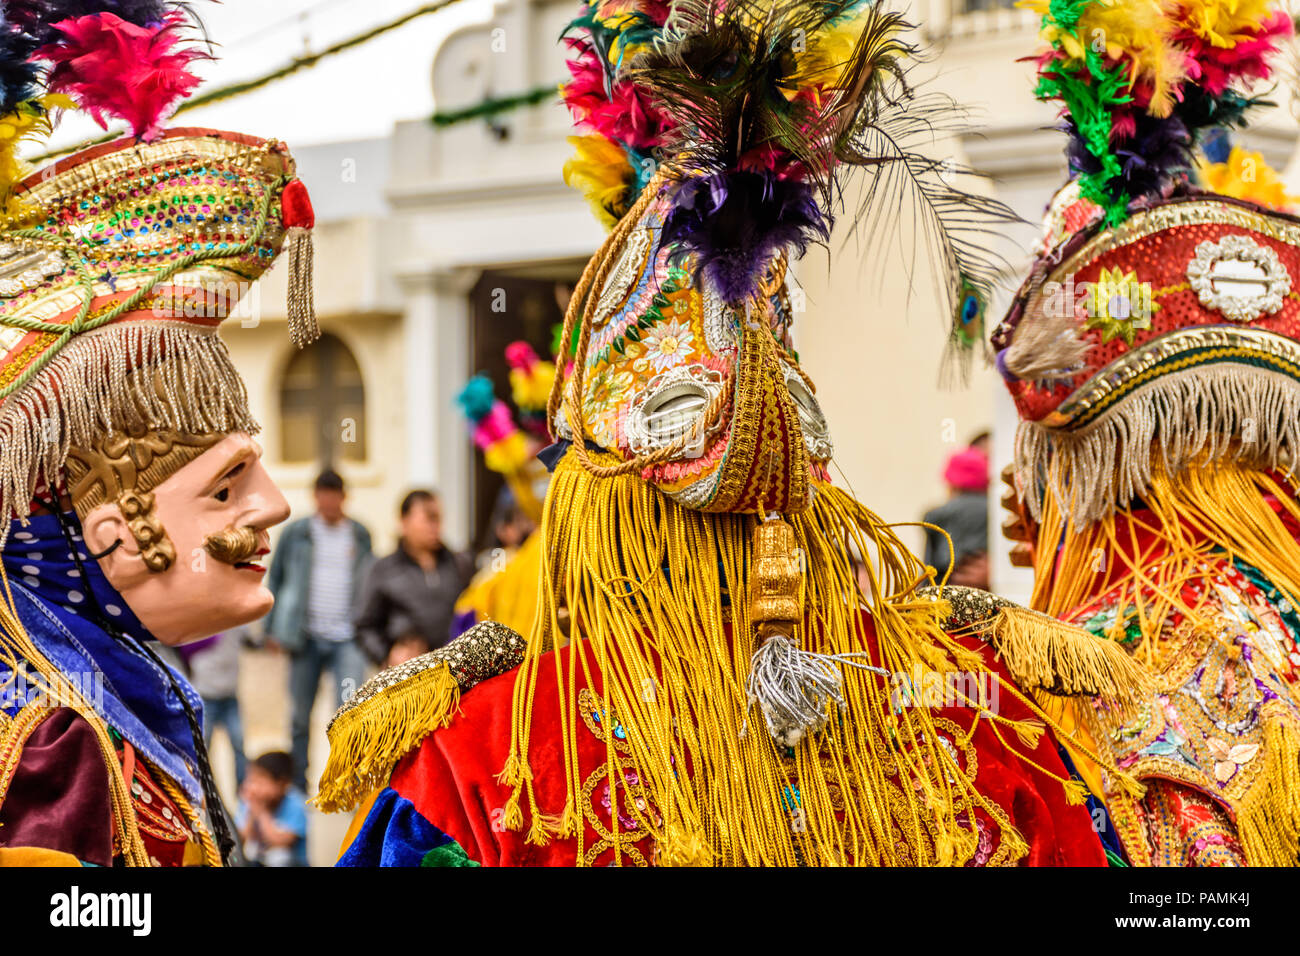 Parramos, Guatemala - December 28, 2016: Traditional folk dancers in mask & costume for Dance of the Moors & Christians near colonial Antigua Stock Photo